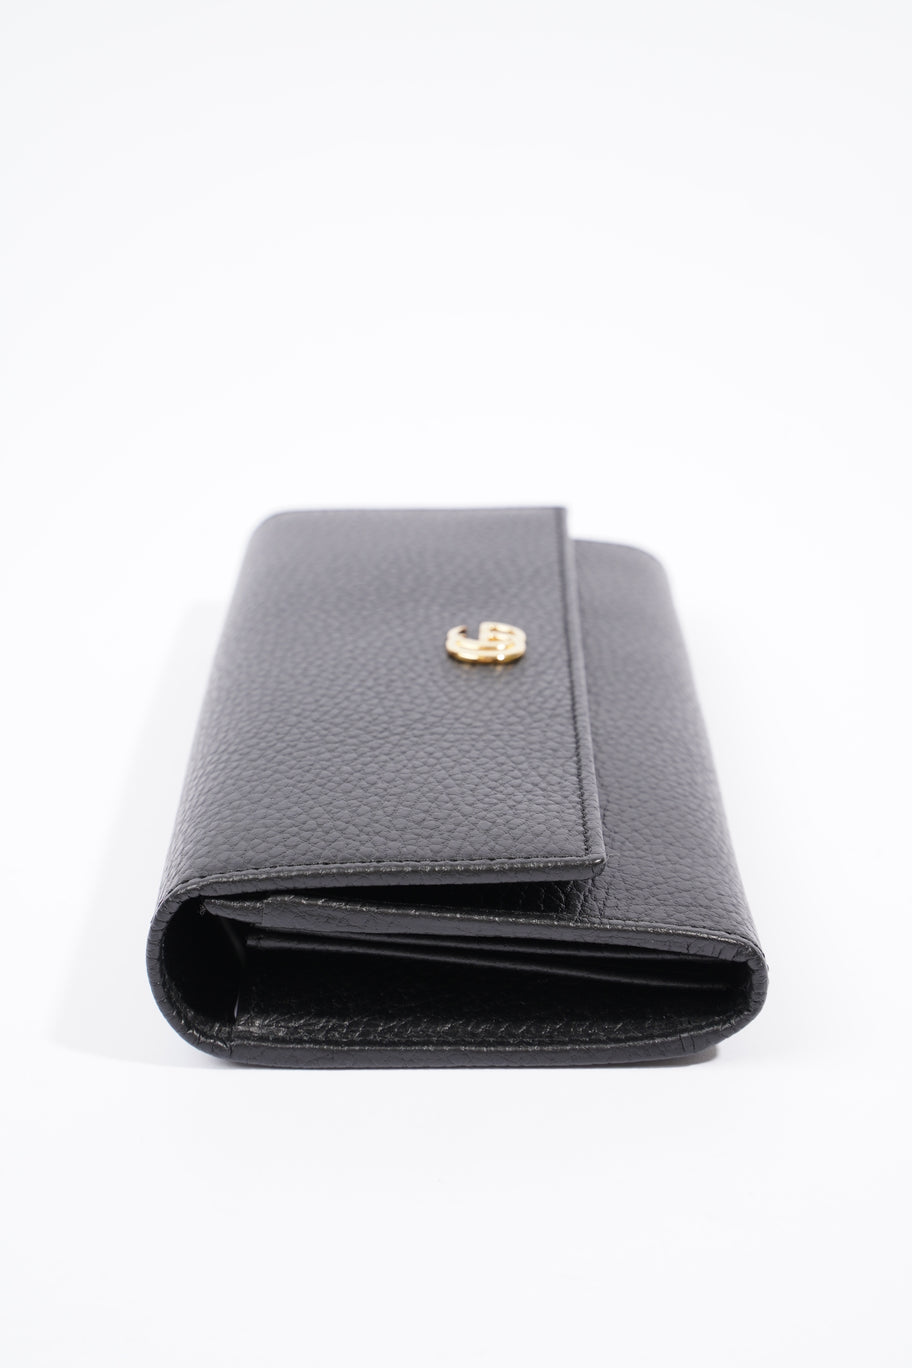 GG Marmont Long Wallet Black Calfskin Leather Image 5